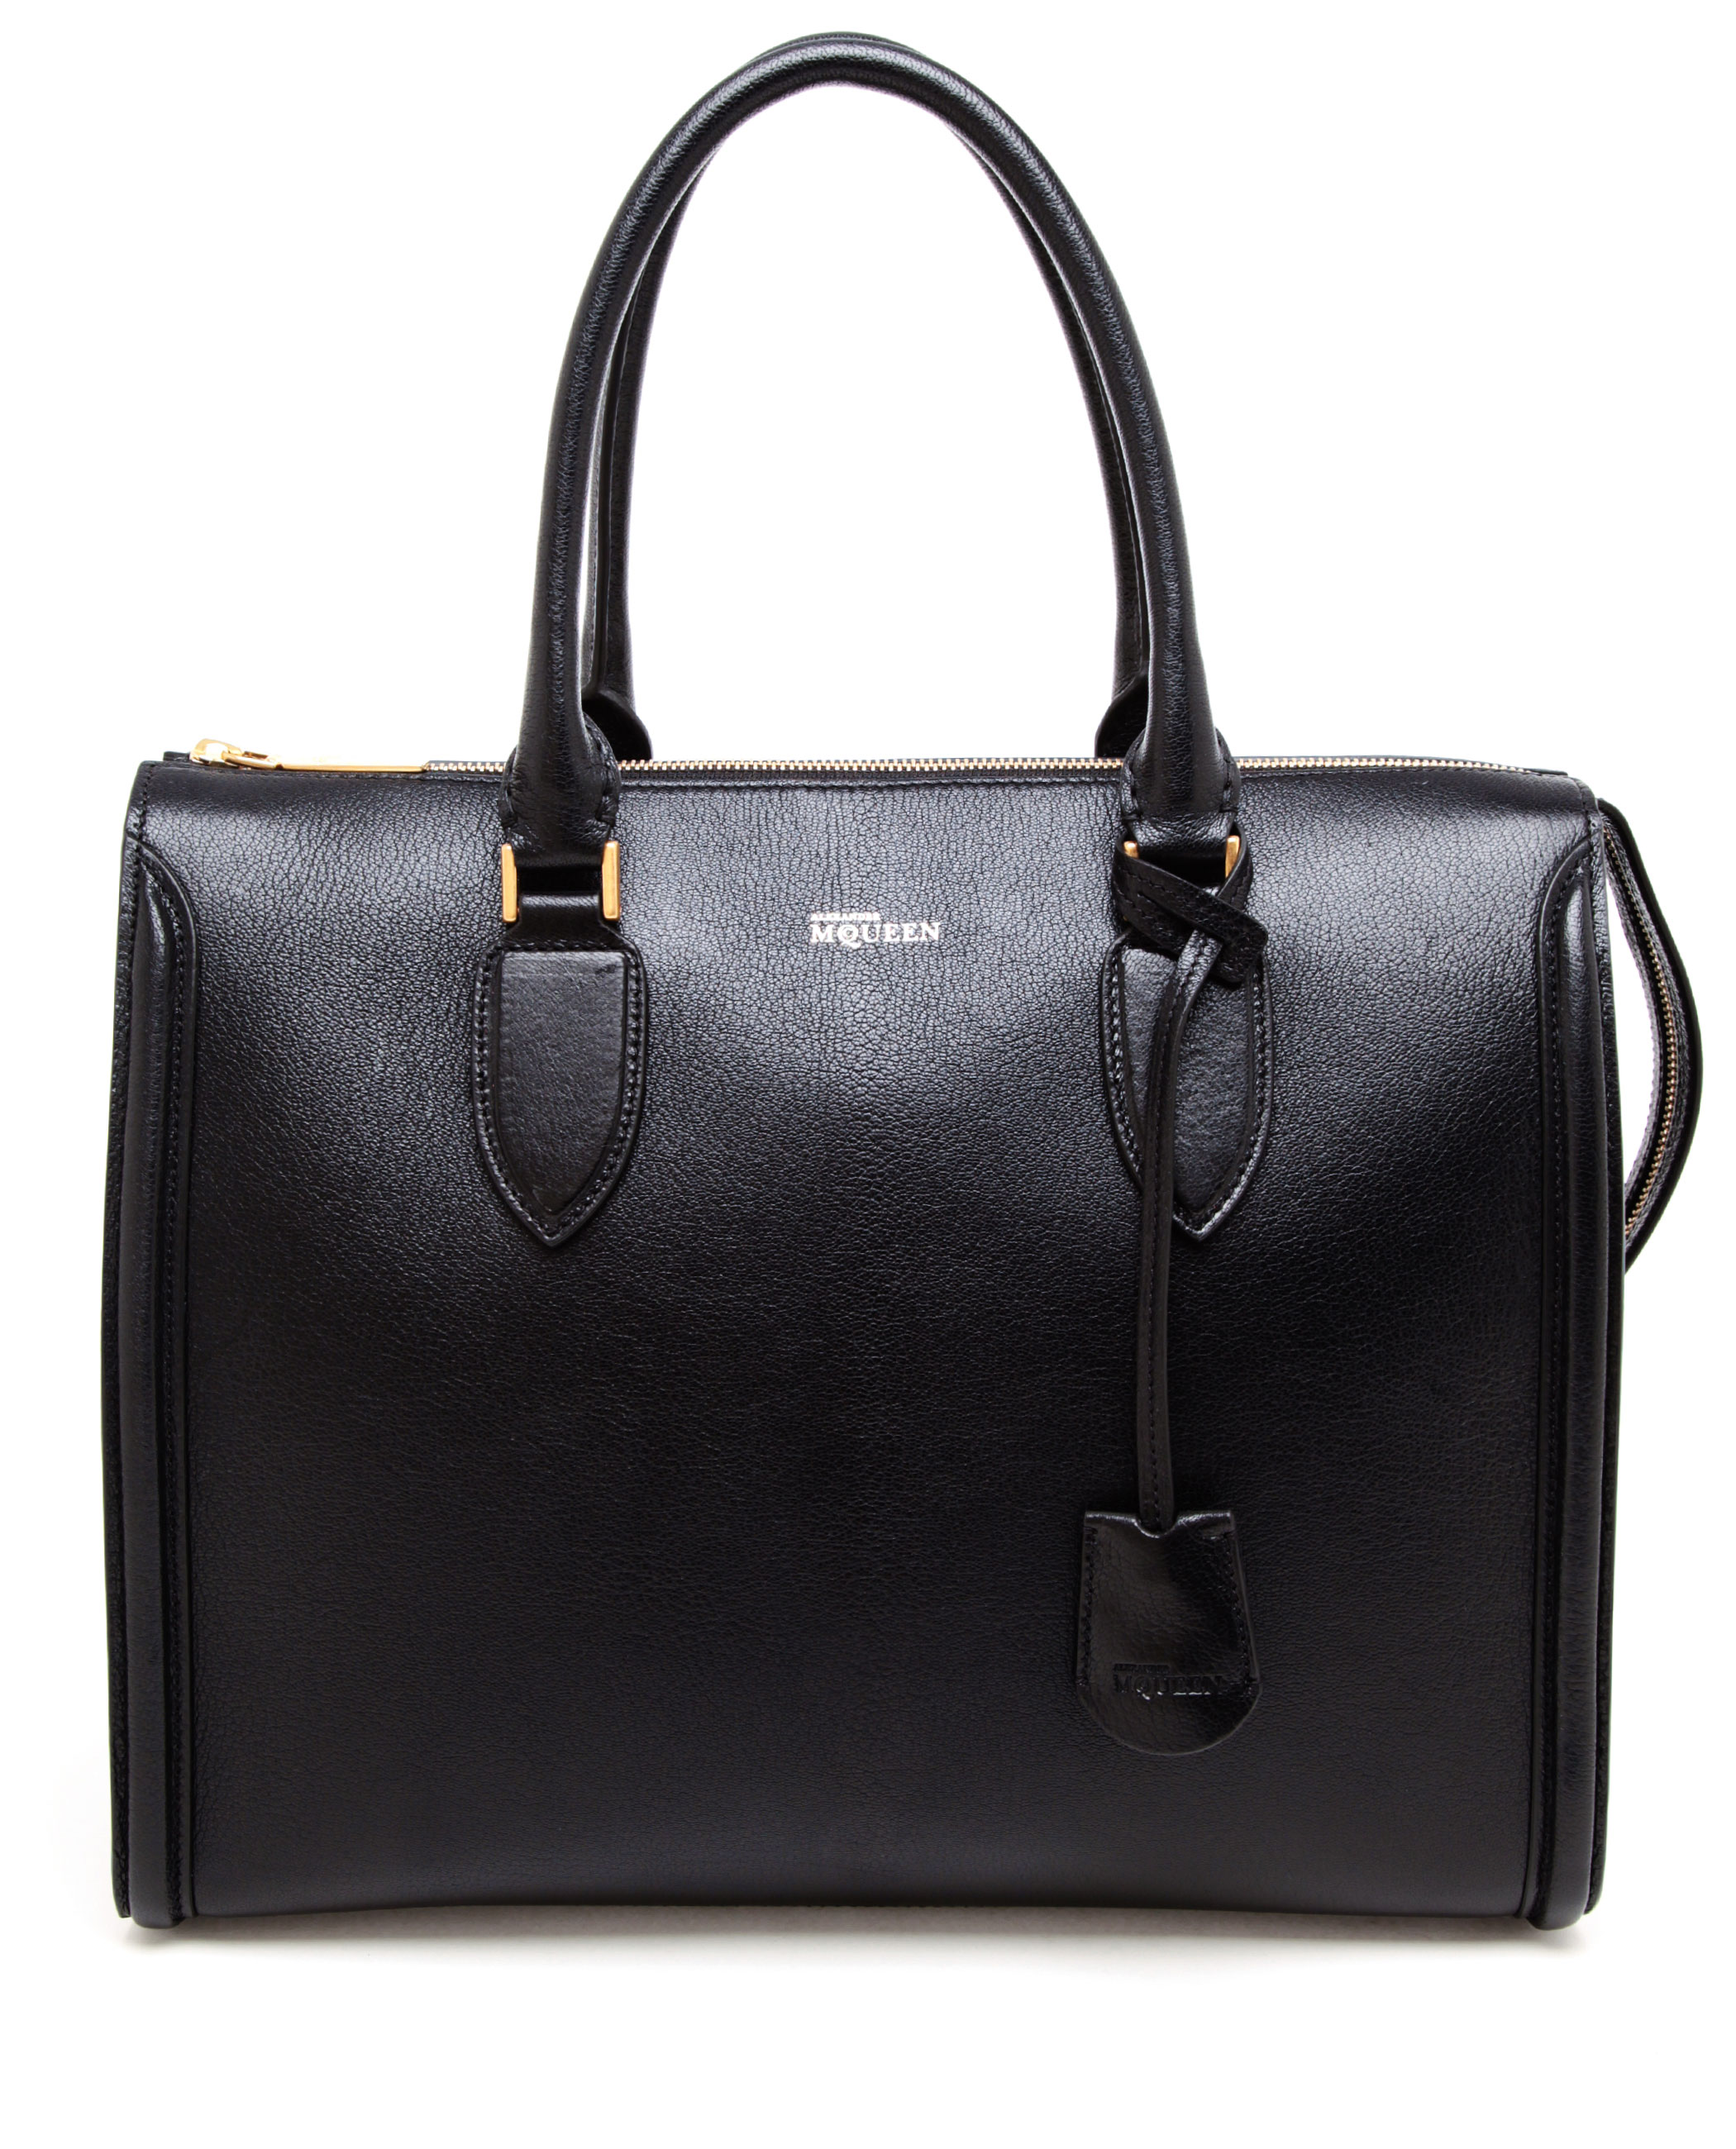 Alexander Mcqueen Heroine Structured Leather Tote Bag in Black | Lyst